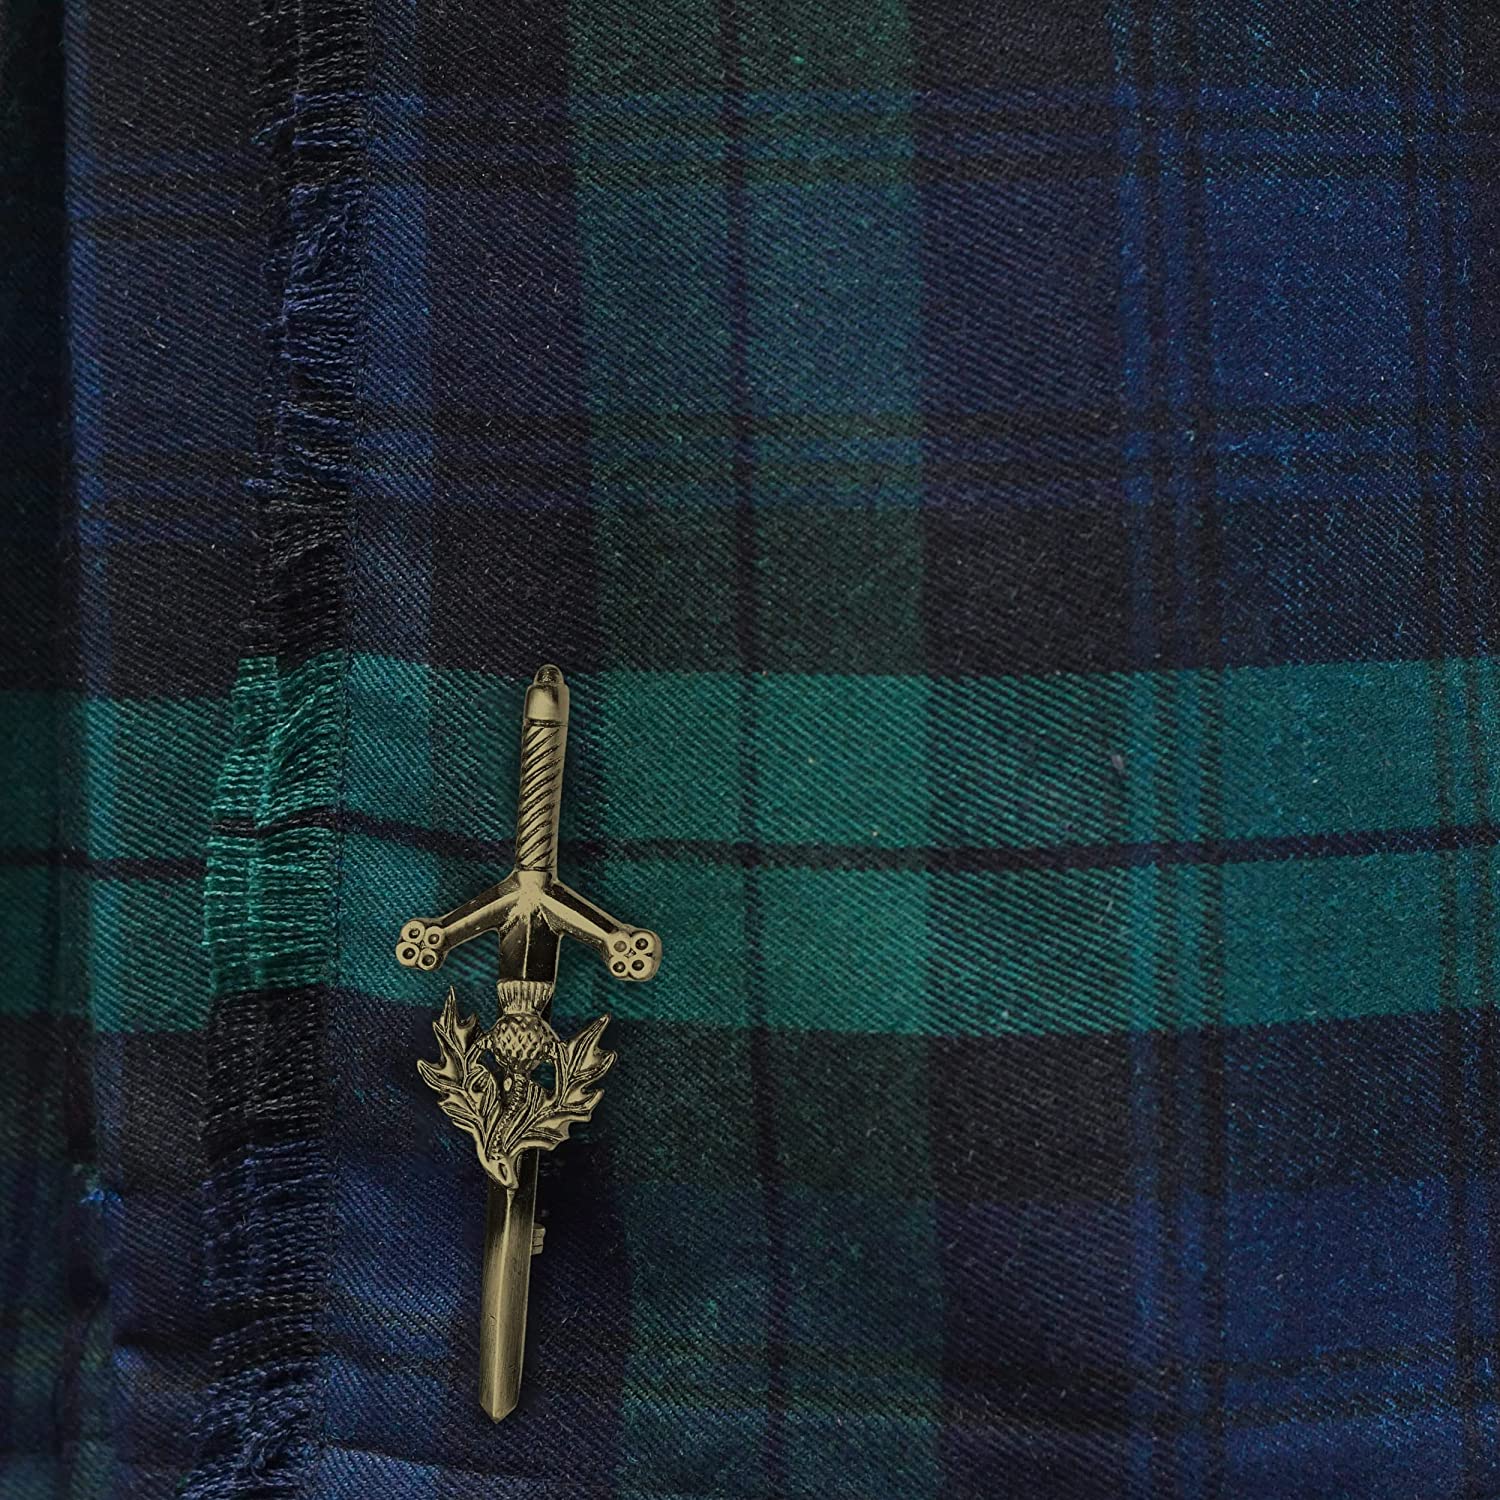 Antique Kilt Pin with a detailed thistle design, perfect for adding elegance to your kilt outfit.